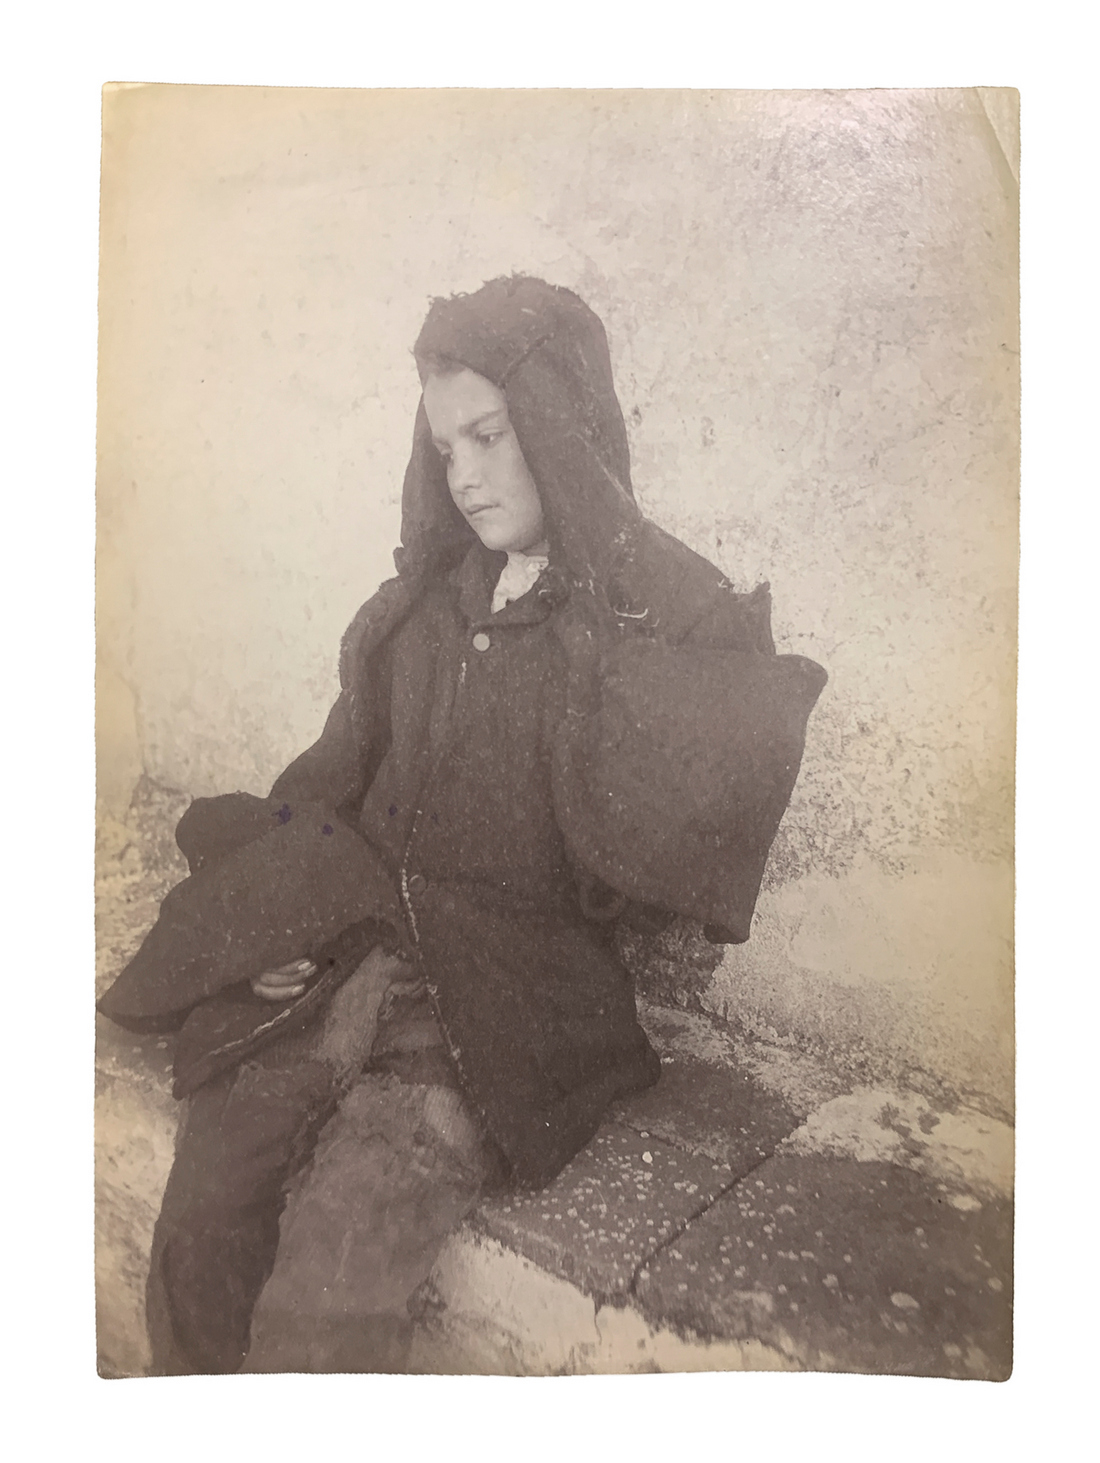 Wilhelm von Gloeden (1856-1931), albumin photos depicting young guy sitting. Numbered 317 and hallma